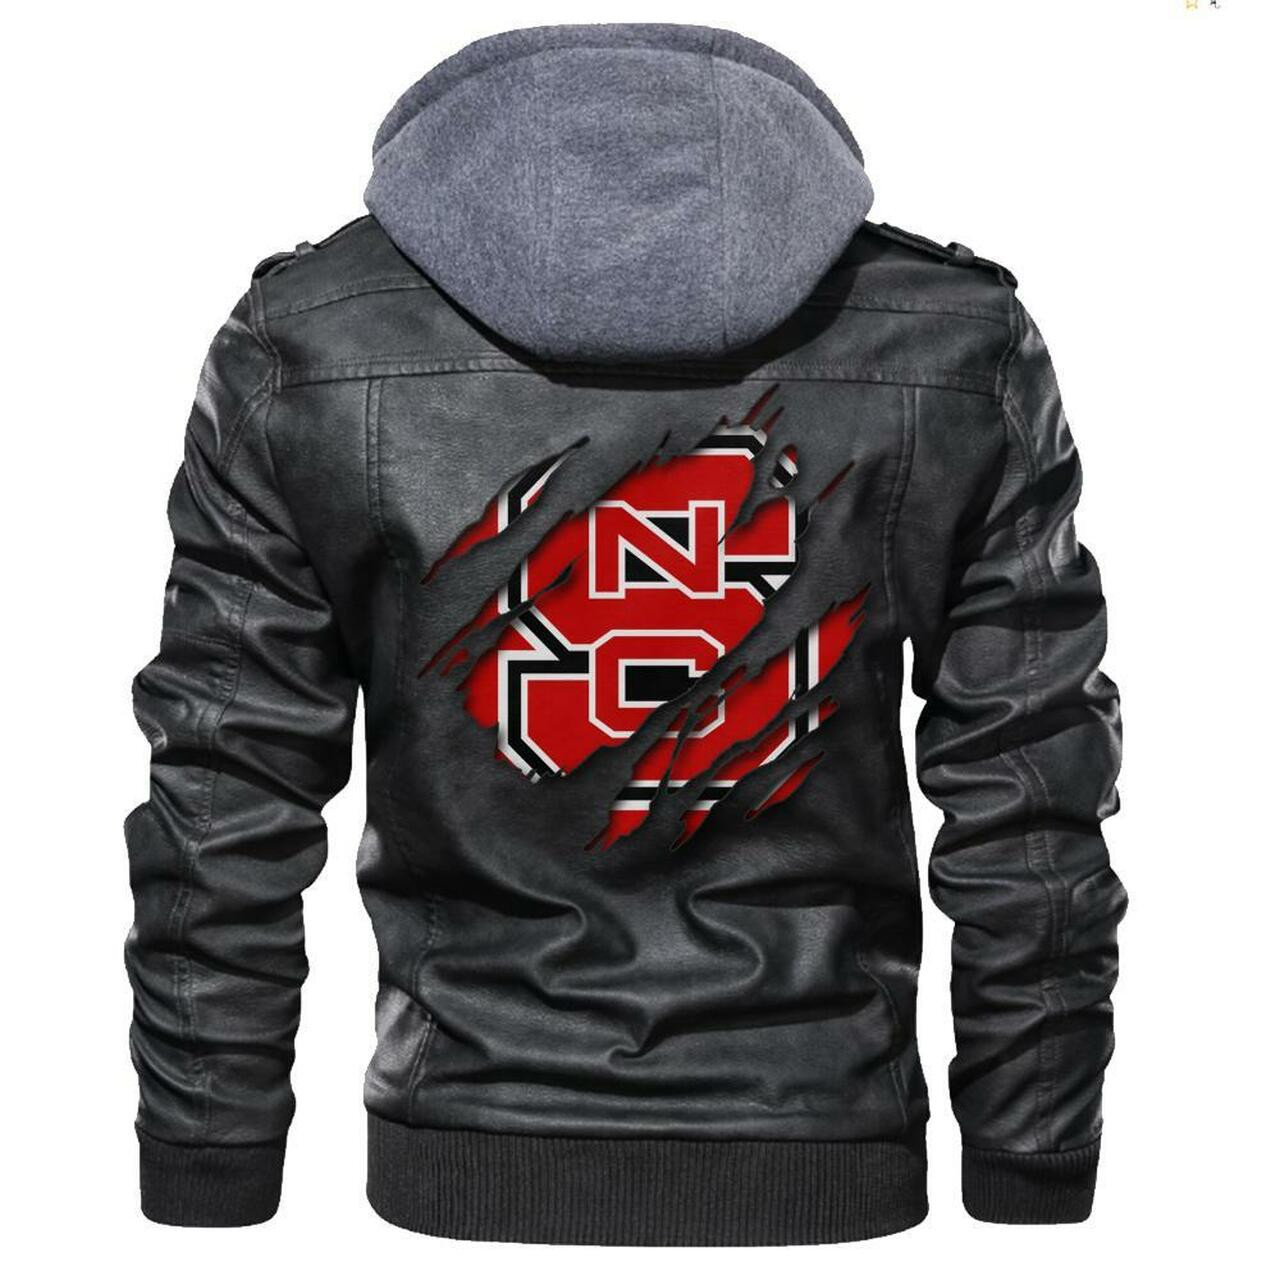 Nice leather jacket For you 125